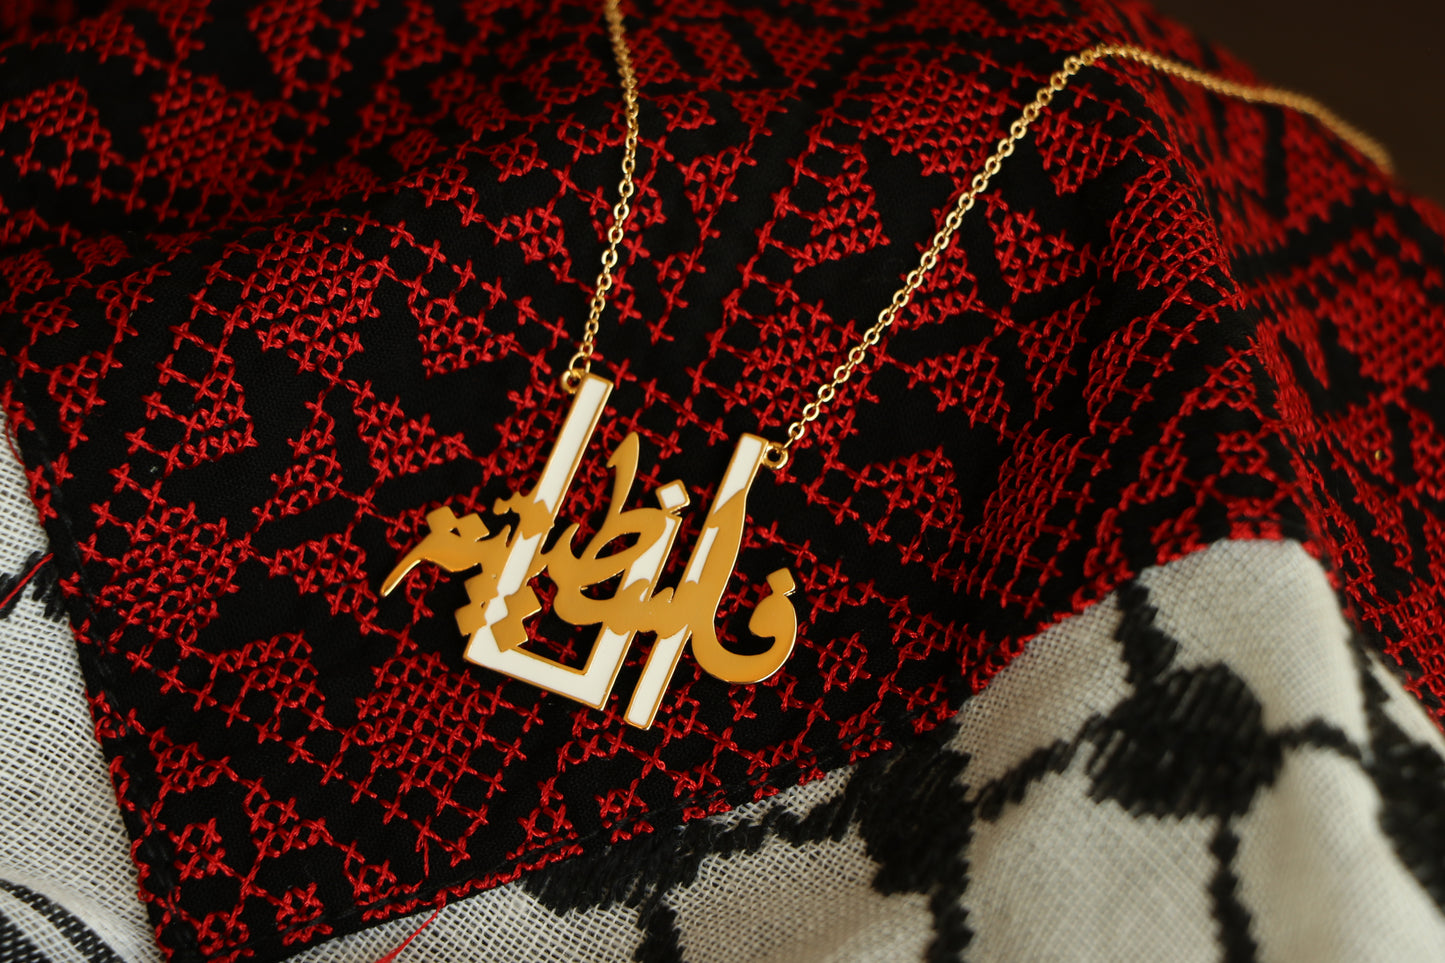 Necklace (ANA FALASTENYEH) "I am Palestinian" Word Written In Arabic Calligraphy in the GOLD & WHITE colors